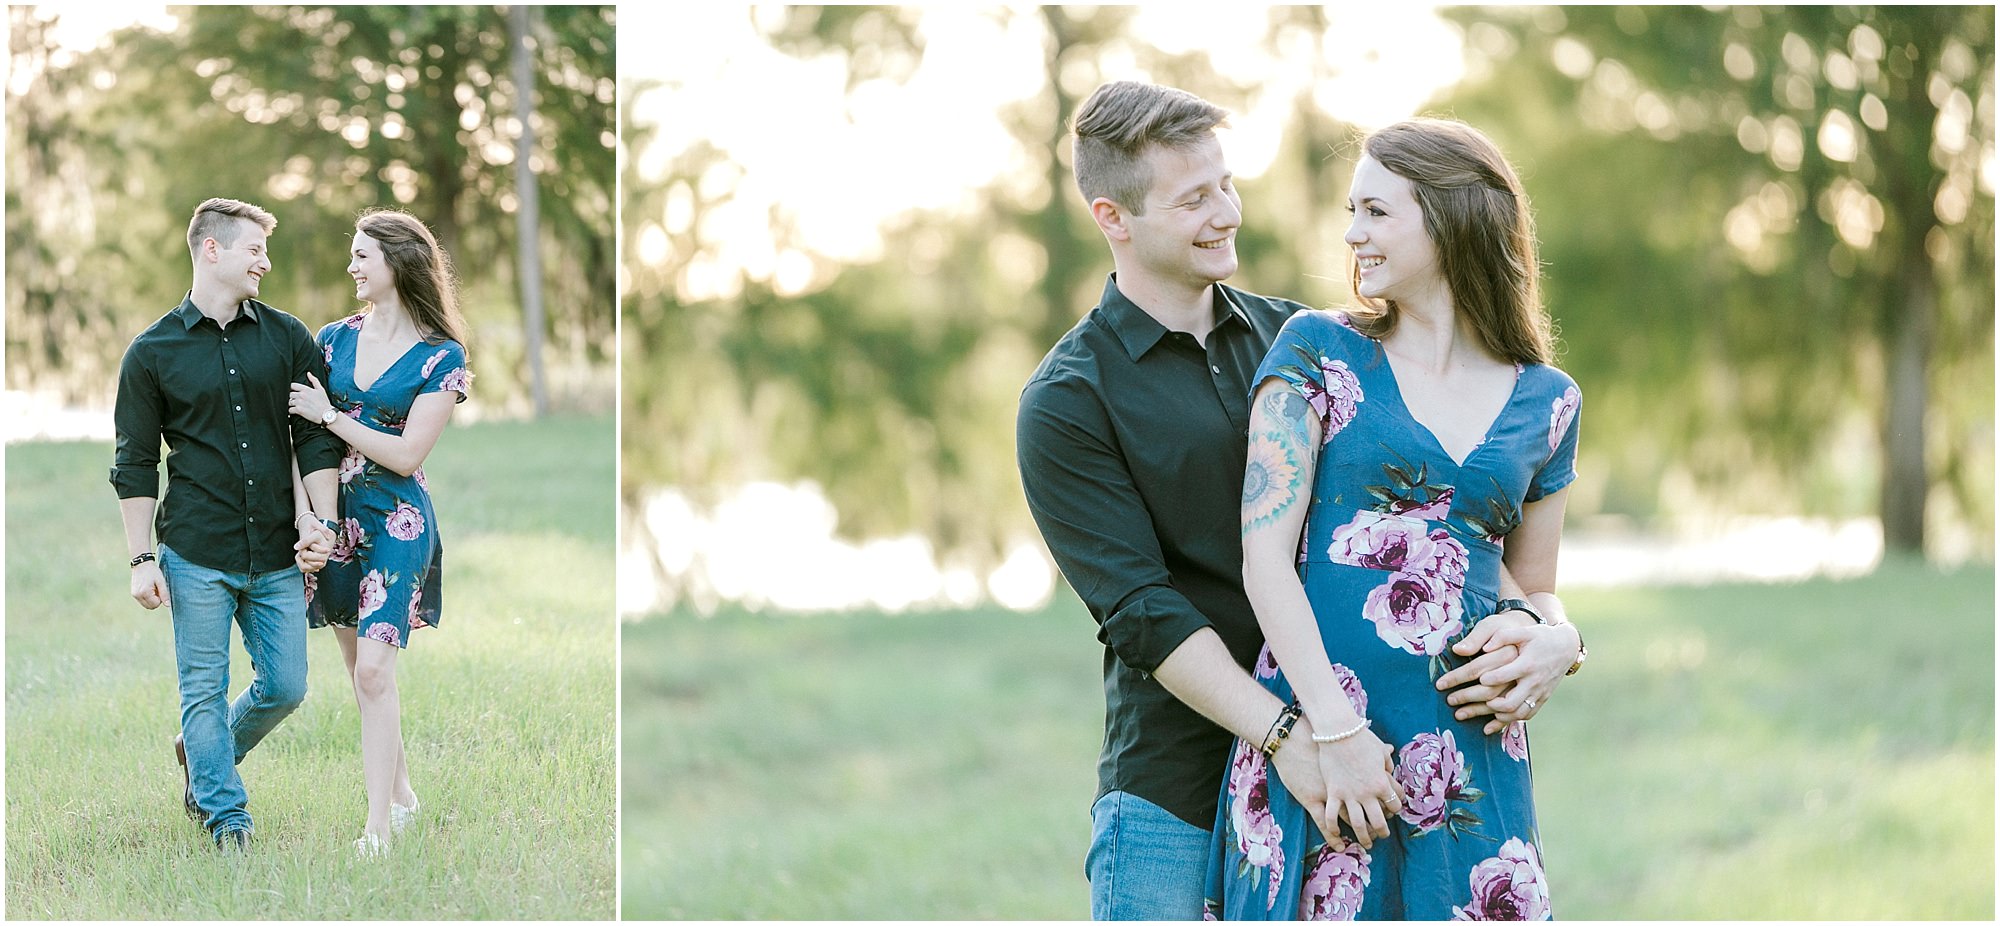 Engaged couple hold hands and walk around in grassy field while smiling at each other. 